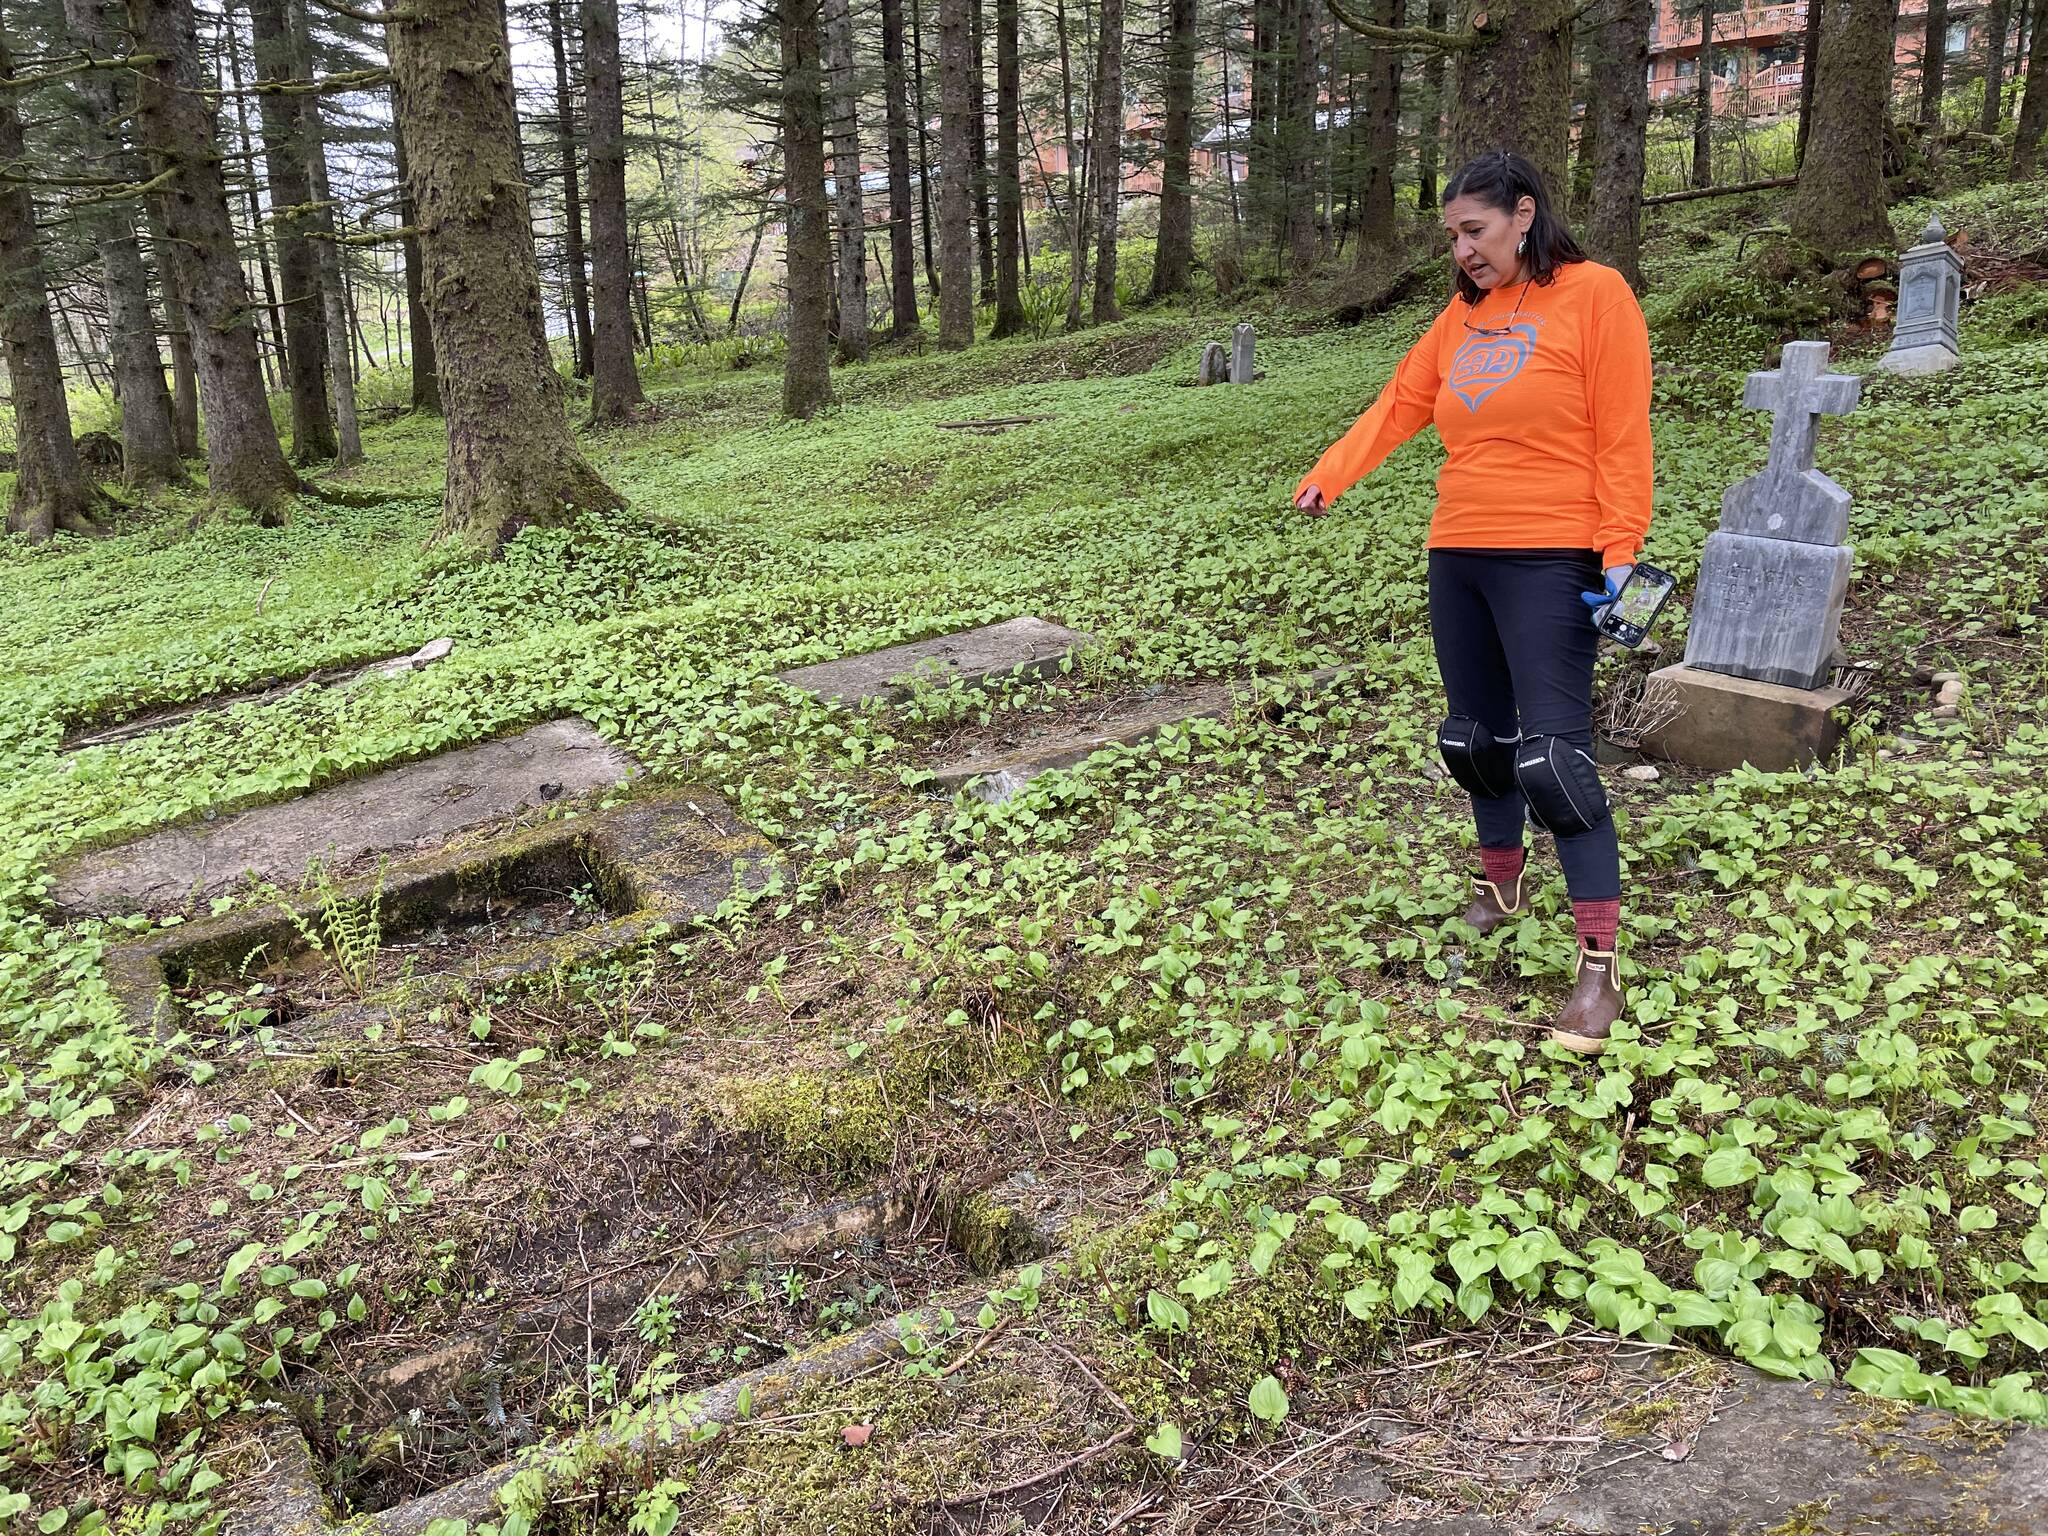 Michael S. Lockett / Juneau Empire 
Jamiann Hasselquist, one of the organizers of the cleanup of the cemetery located near Lawson Creek, gestures to an Alaska Native grave that had long gone neglected on May 14, 2022.